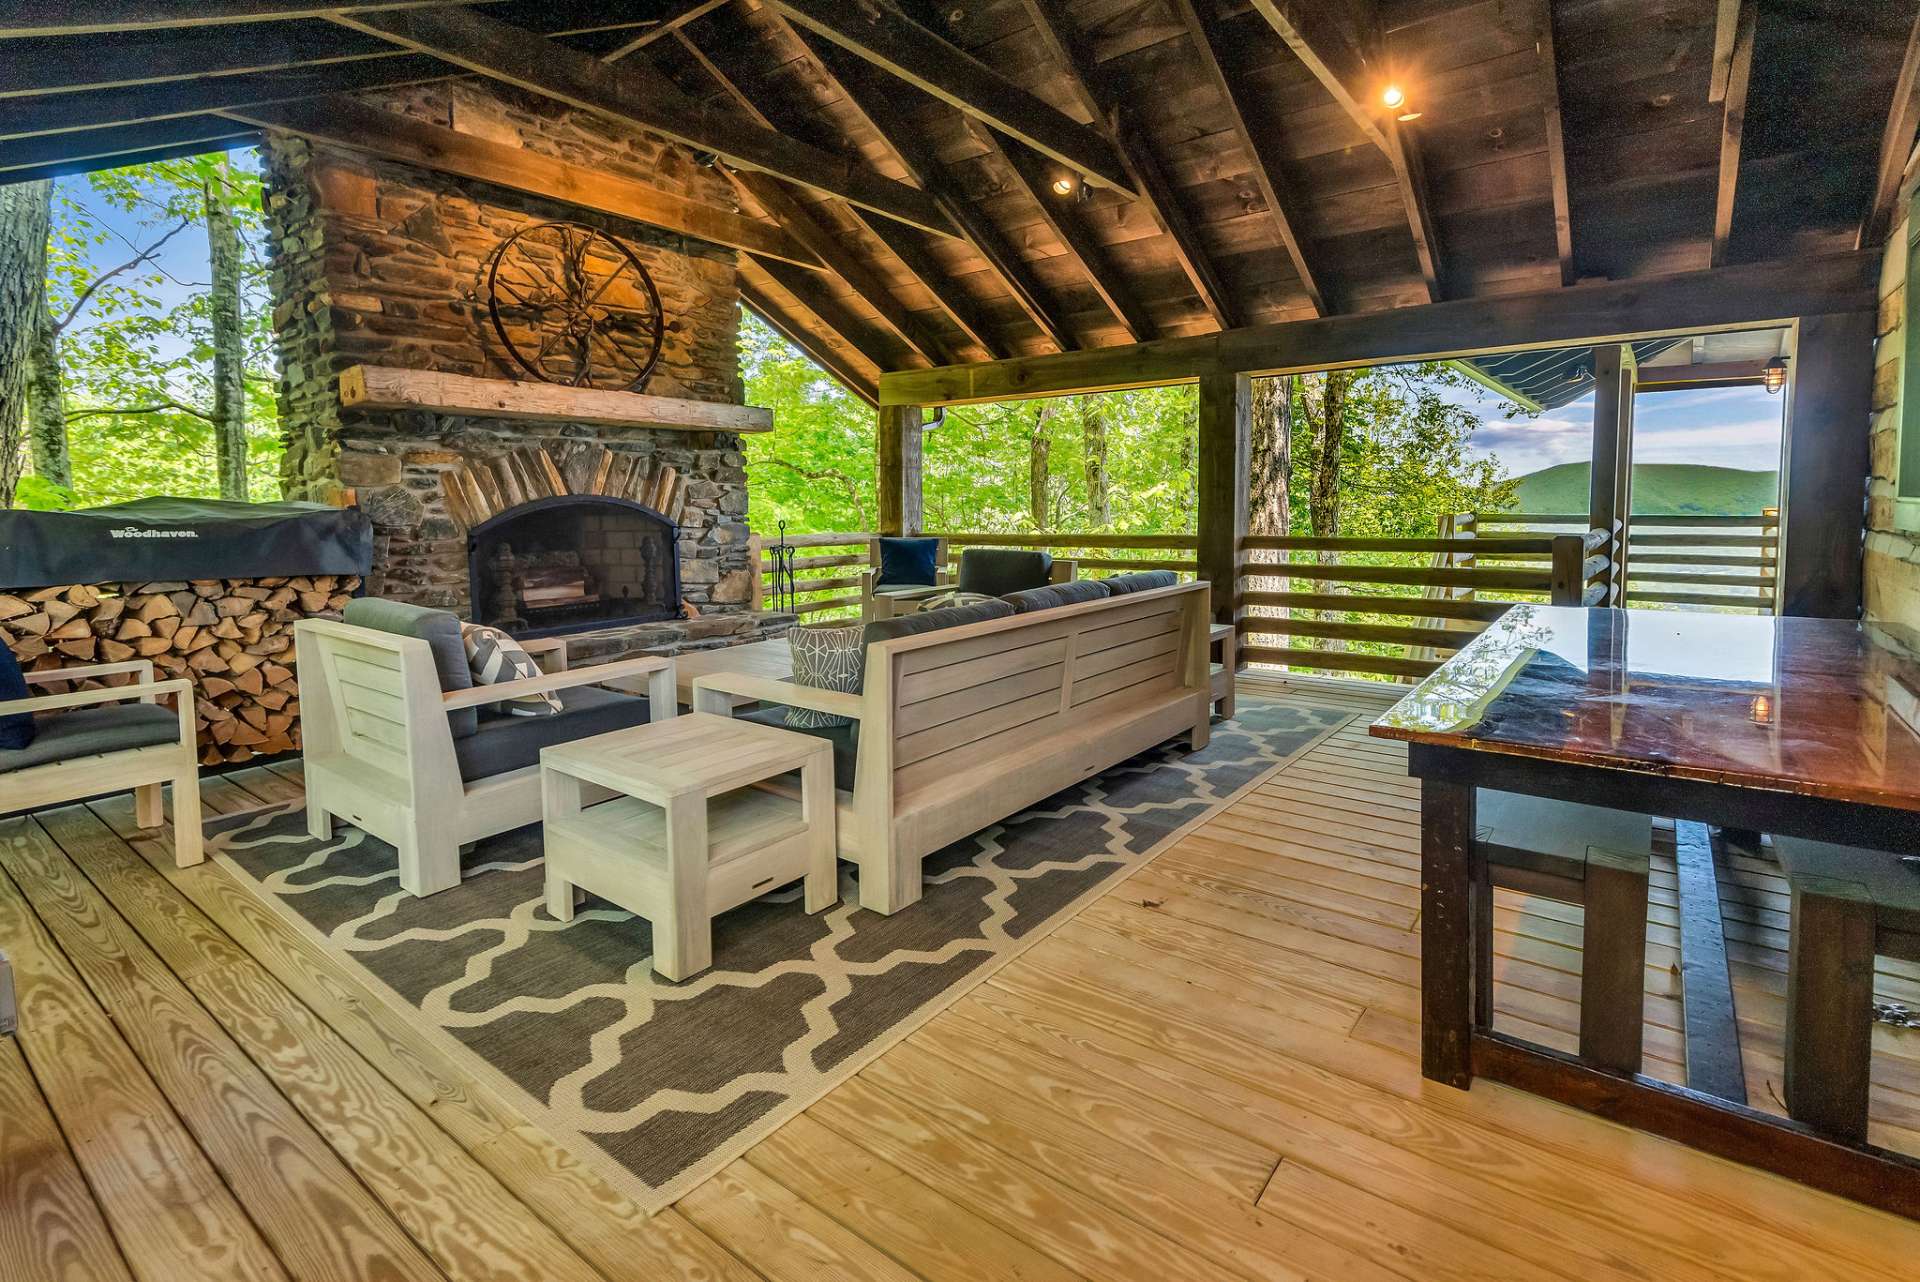 Surrounded by majestic hardwoods providing privacy, this covered porch offers plenty of space and seating for a crowd but it's also cozy enough for two.